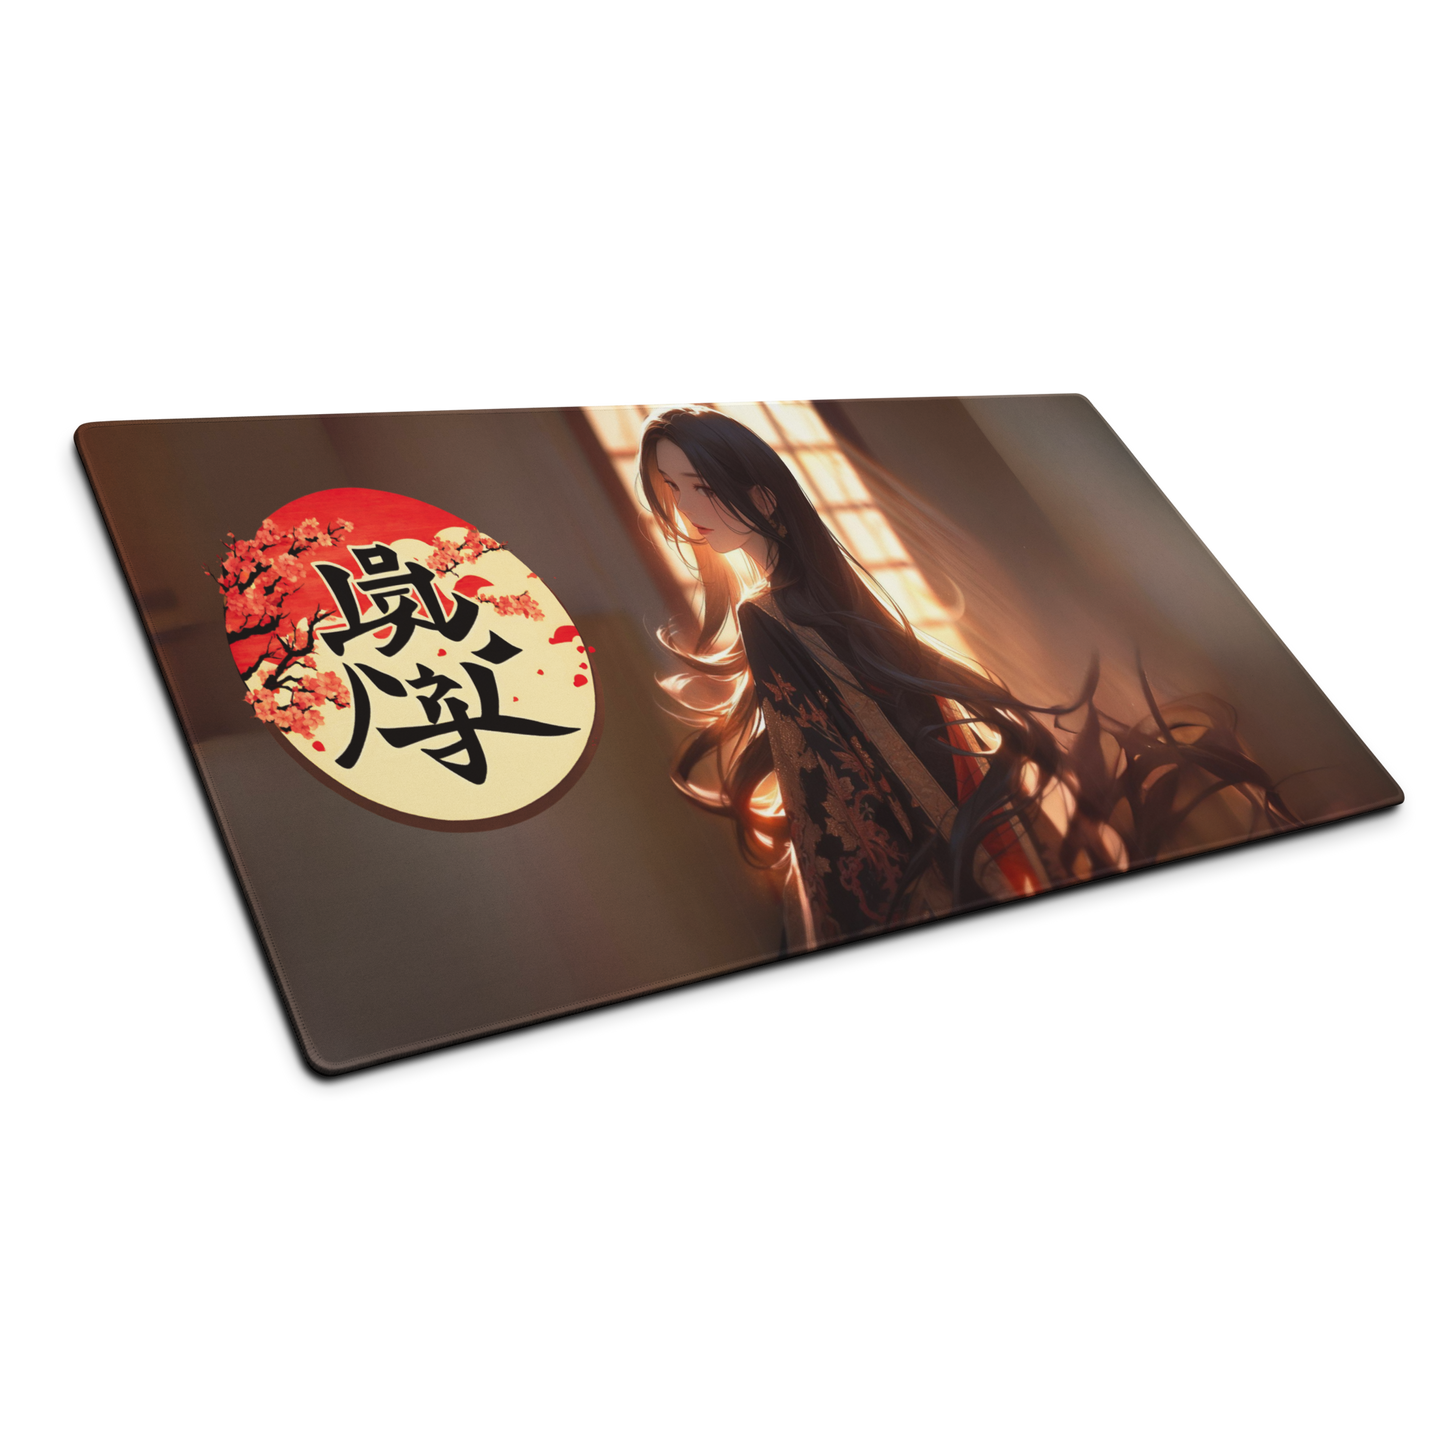 Geisha Anime 36x18 Gaming Mouse Pad with Kanji Love - Large Desk Mat for Gamers